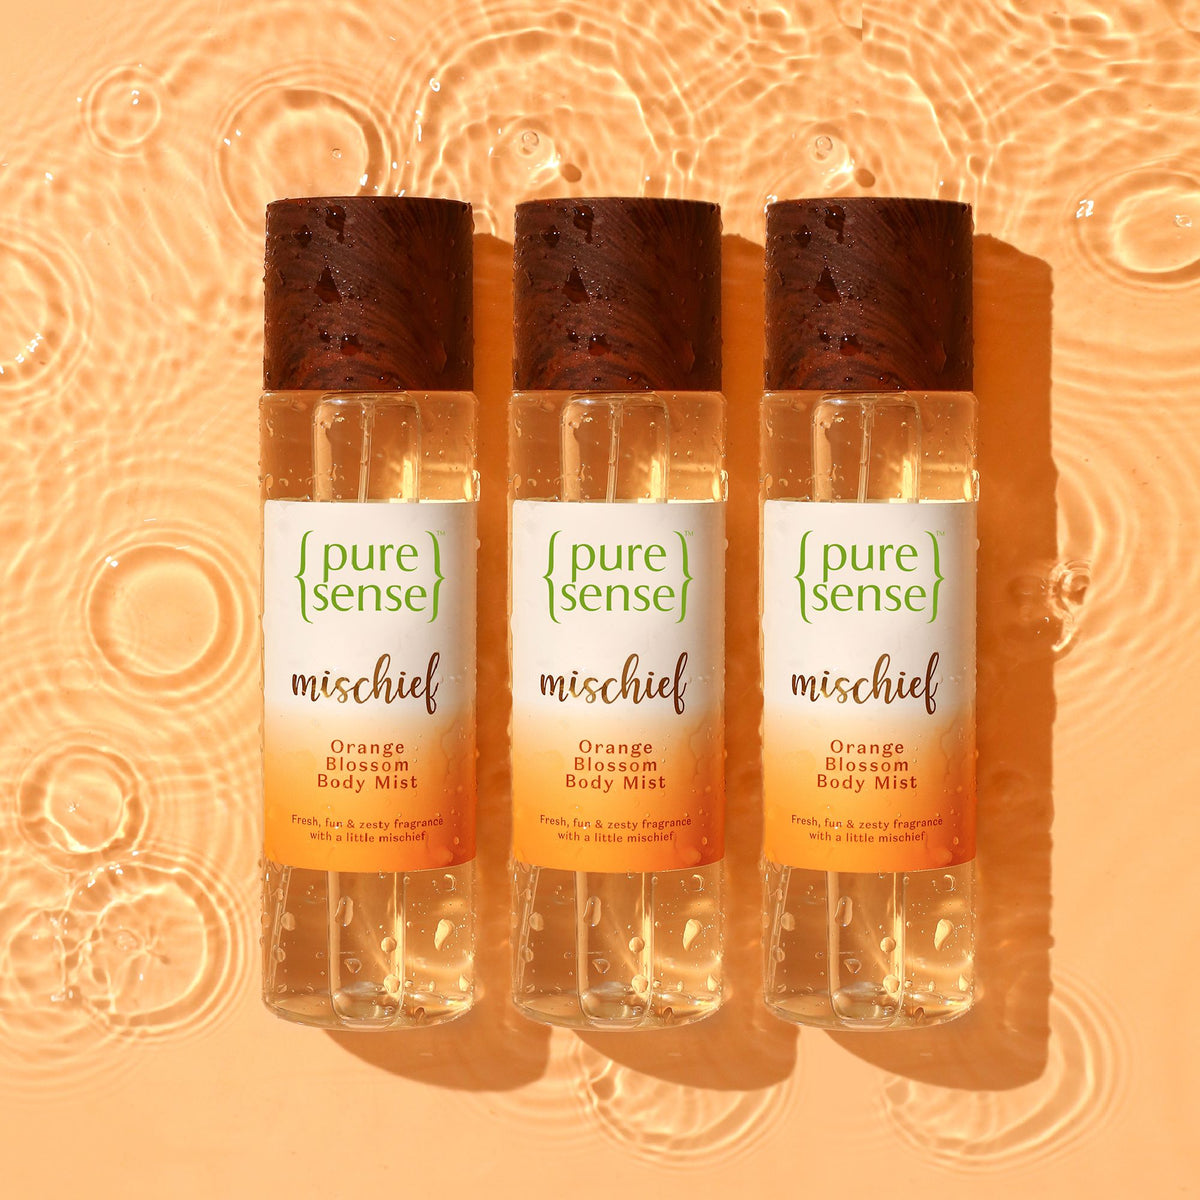 [JIO] Mischief Orange Blossom Body Mist (Pack of 3) | From the makers of Parachute Advansed | 450ml